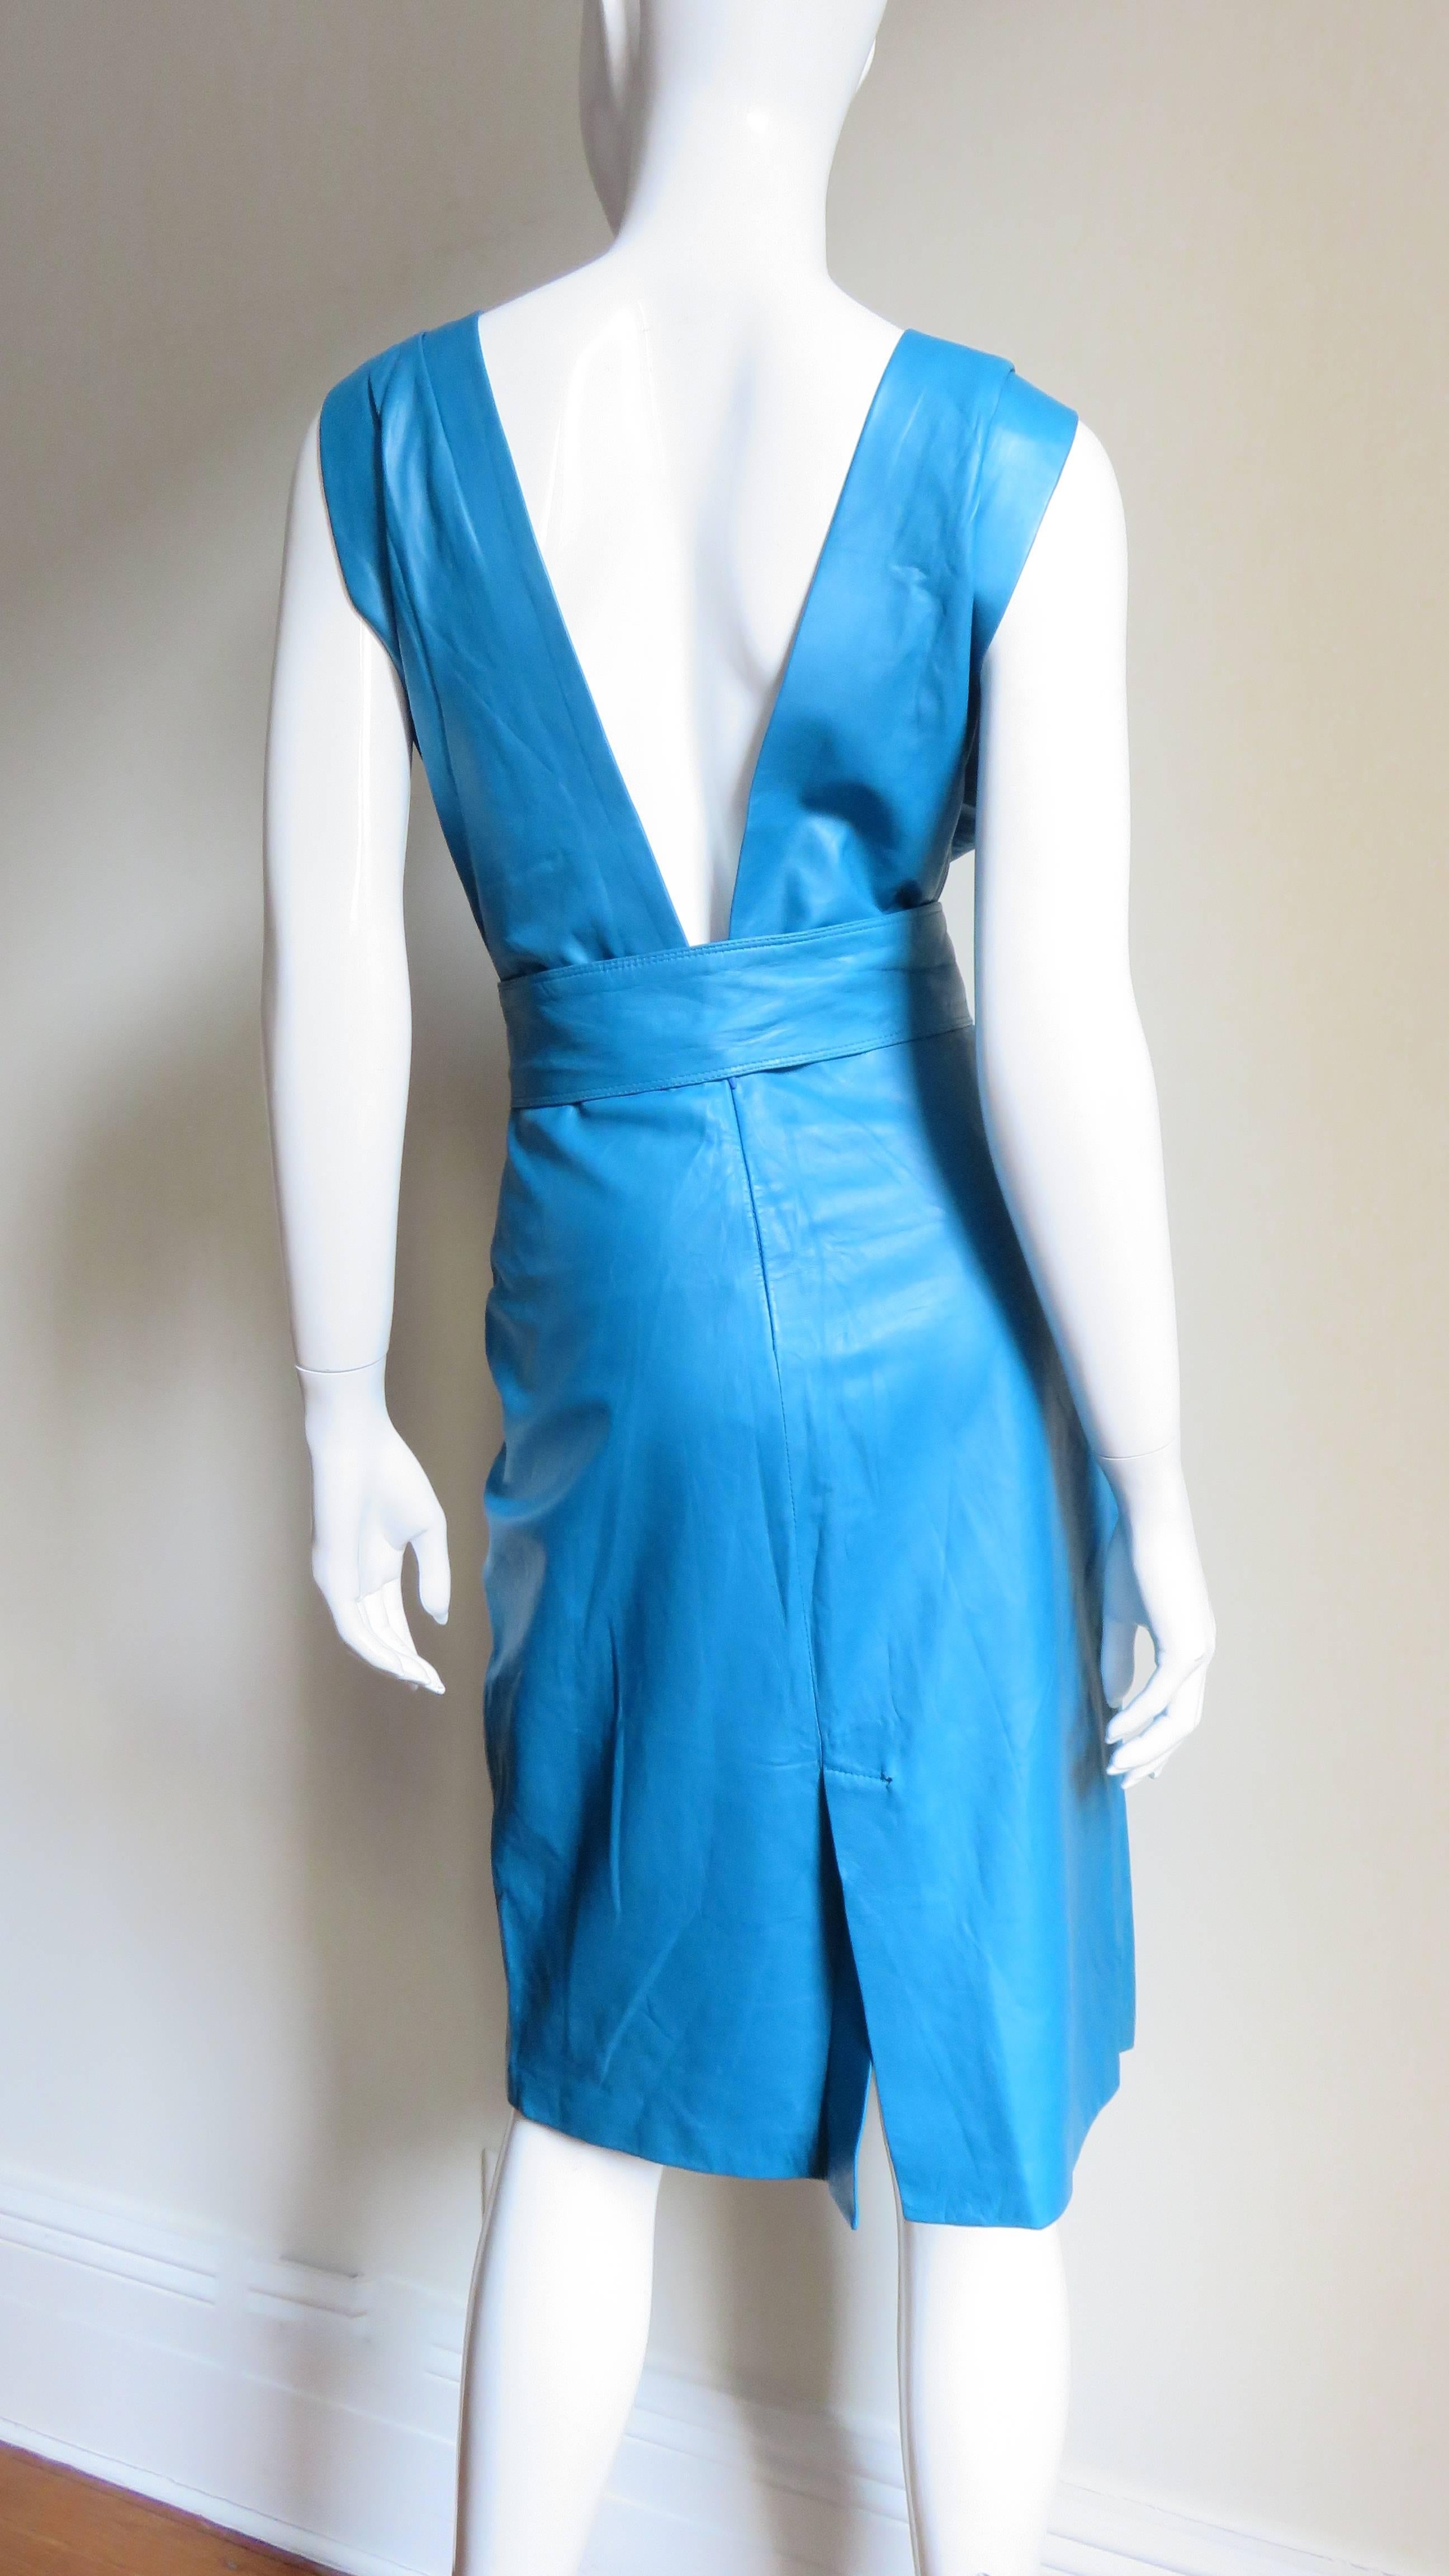  Gianni Versace New Turquoise Leather Dress 1990s For Sale 3